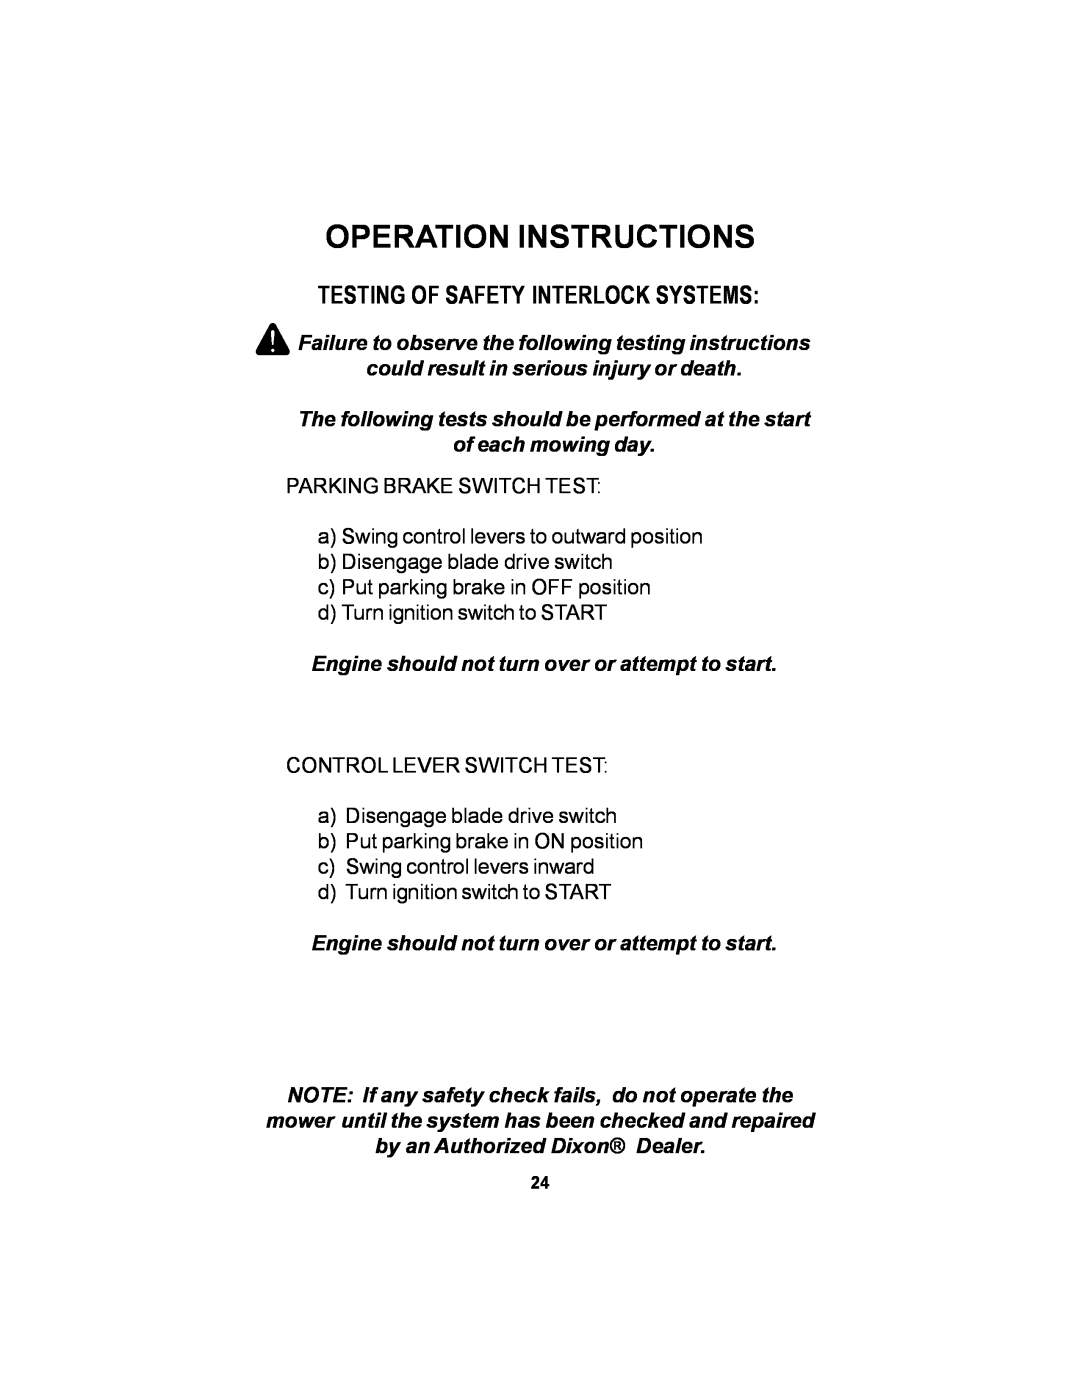 Dixon ELS 60 manual Testing Of Safety Interlock Systems, Operation Instructions 